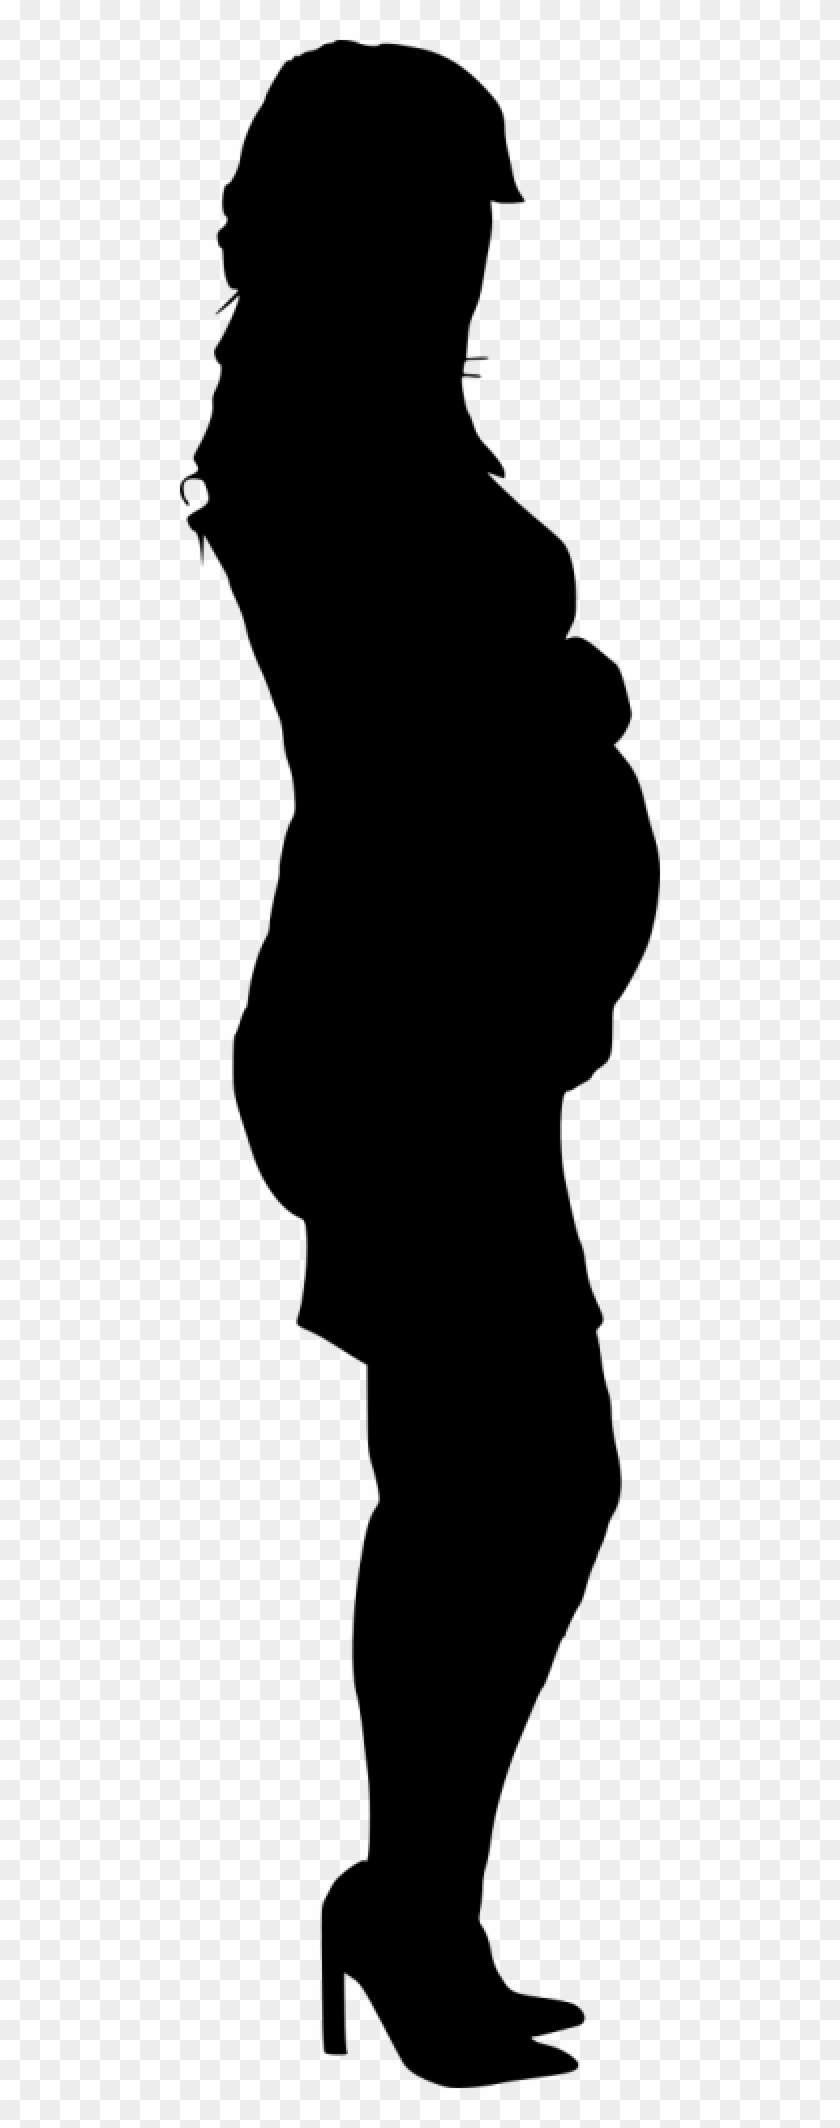 Pregnant Woman Silhouette Png - Pregnant Woman Silhouette Png #223588